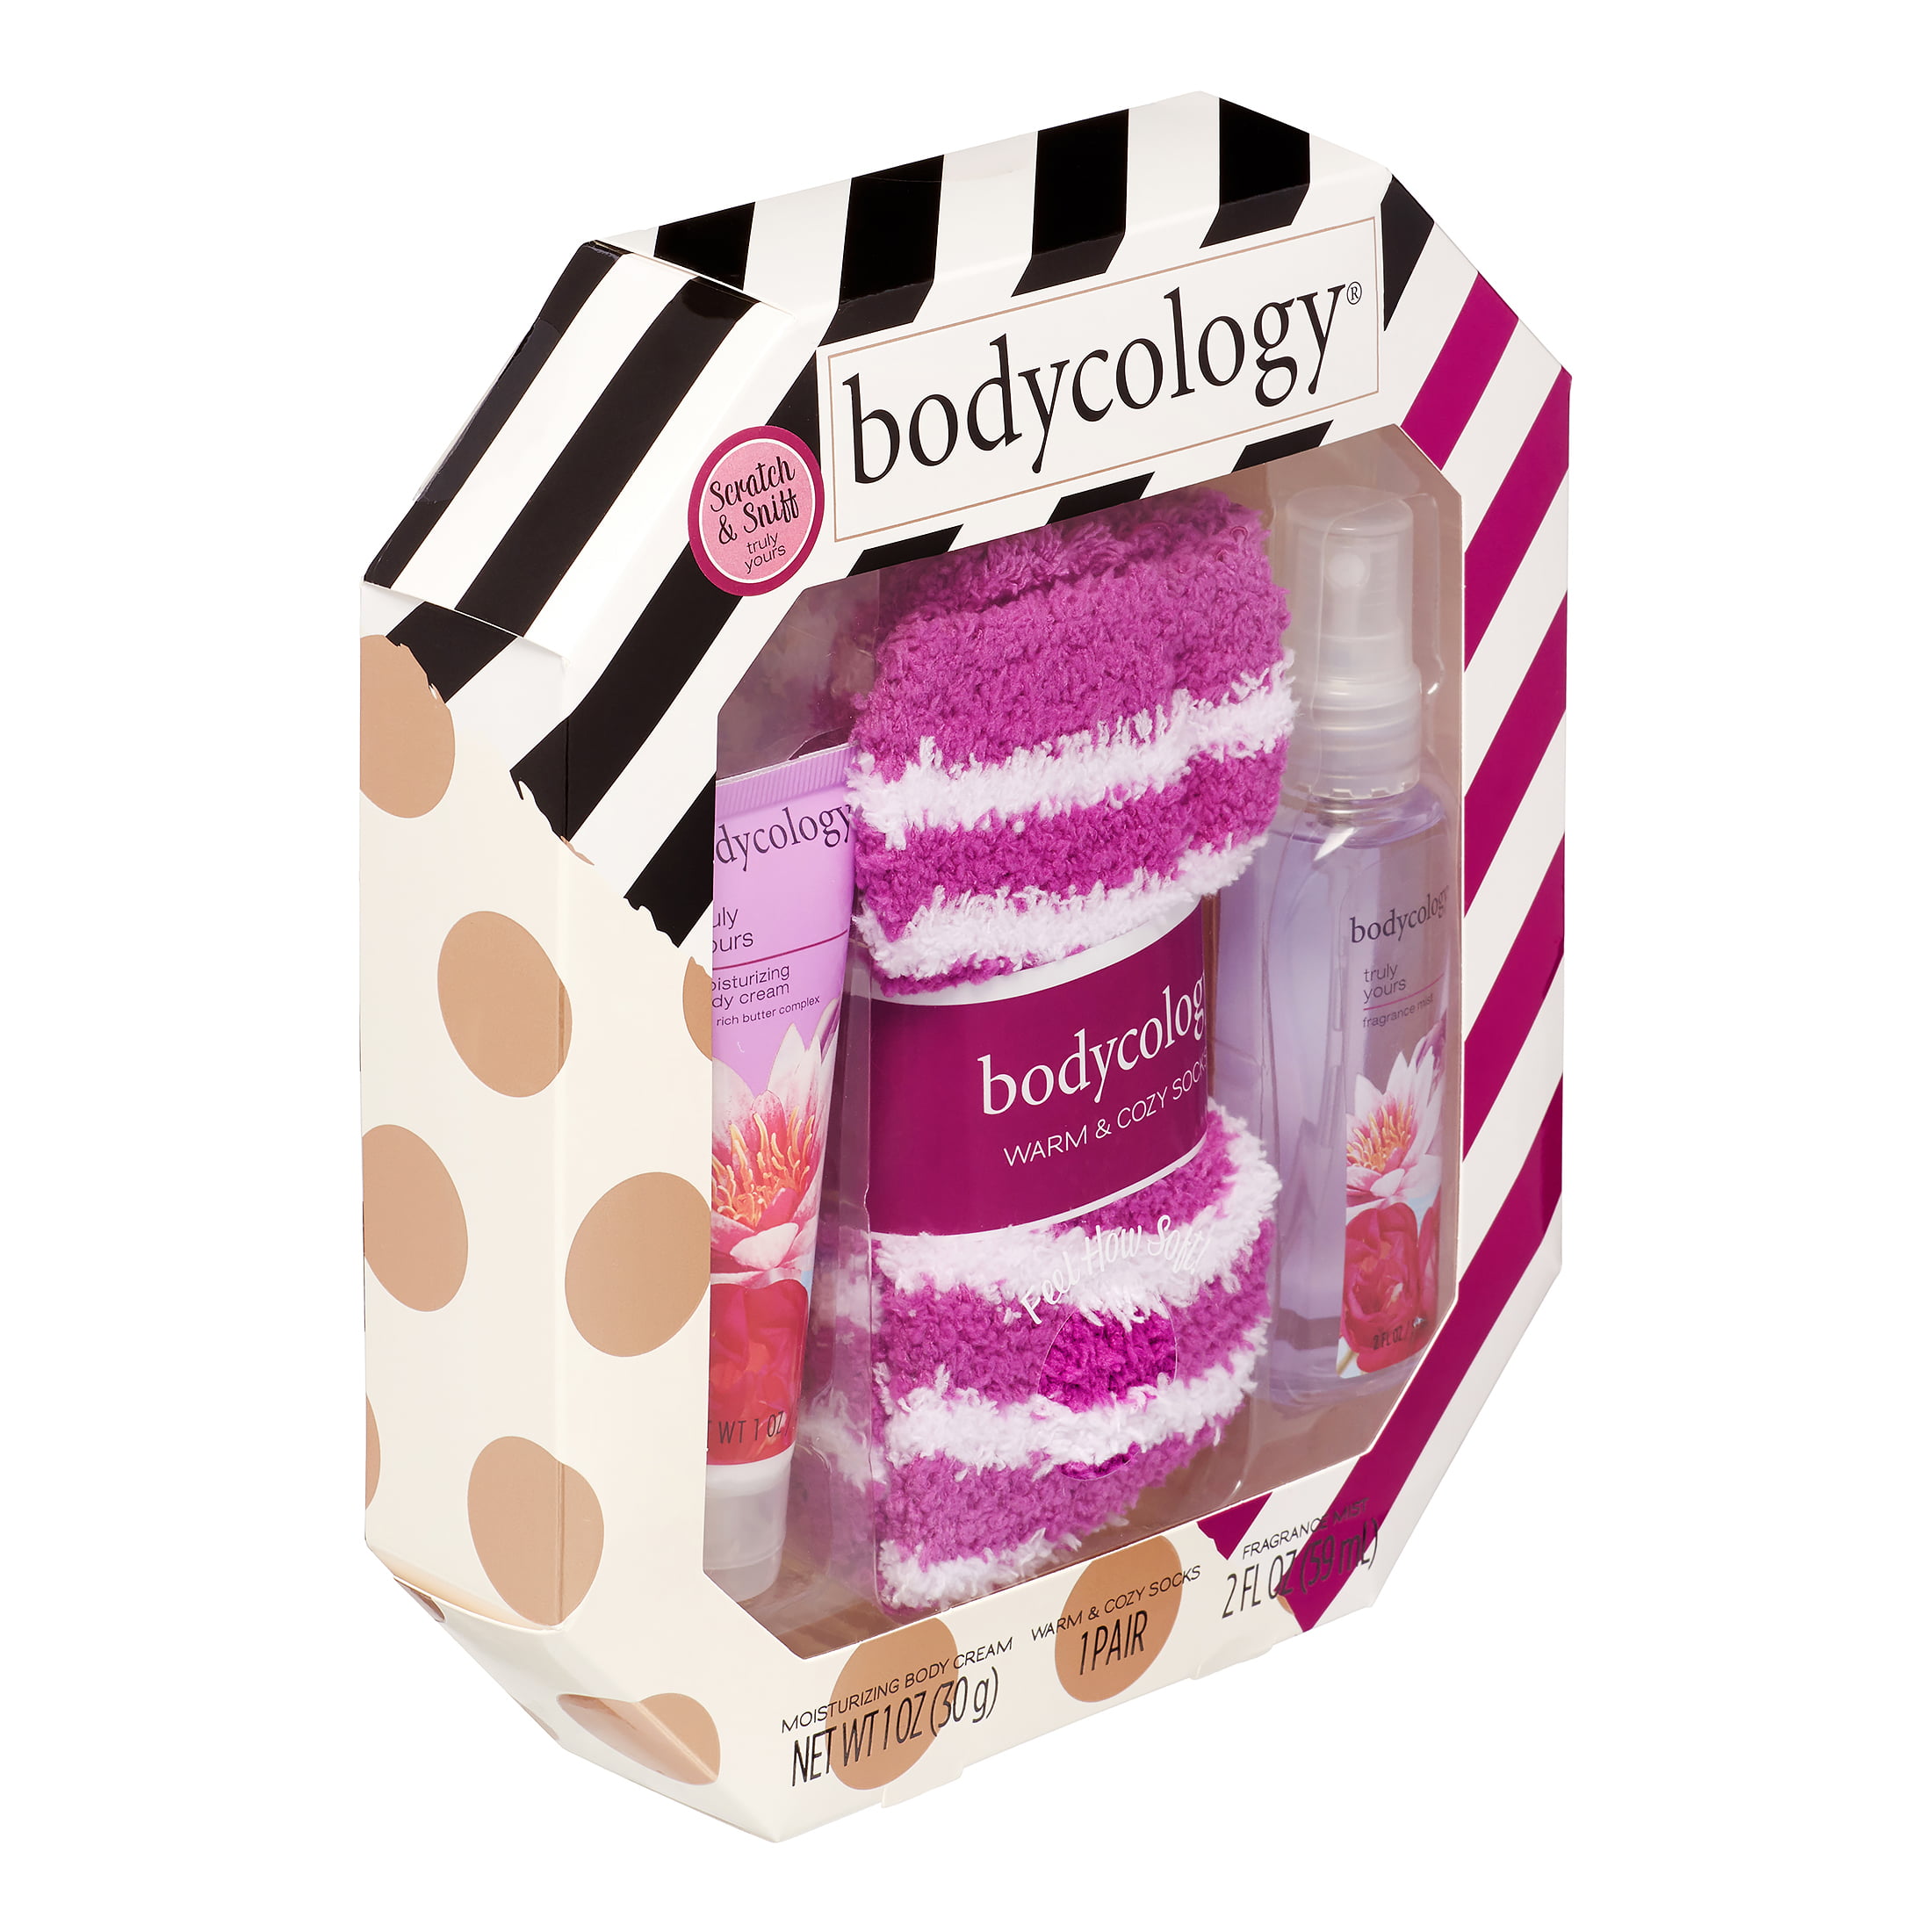 Bodycology Truly Yours Gift Set with Warm Socks, 3 Pieces - Walmart.com